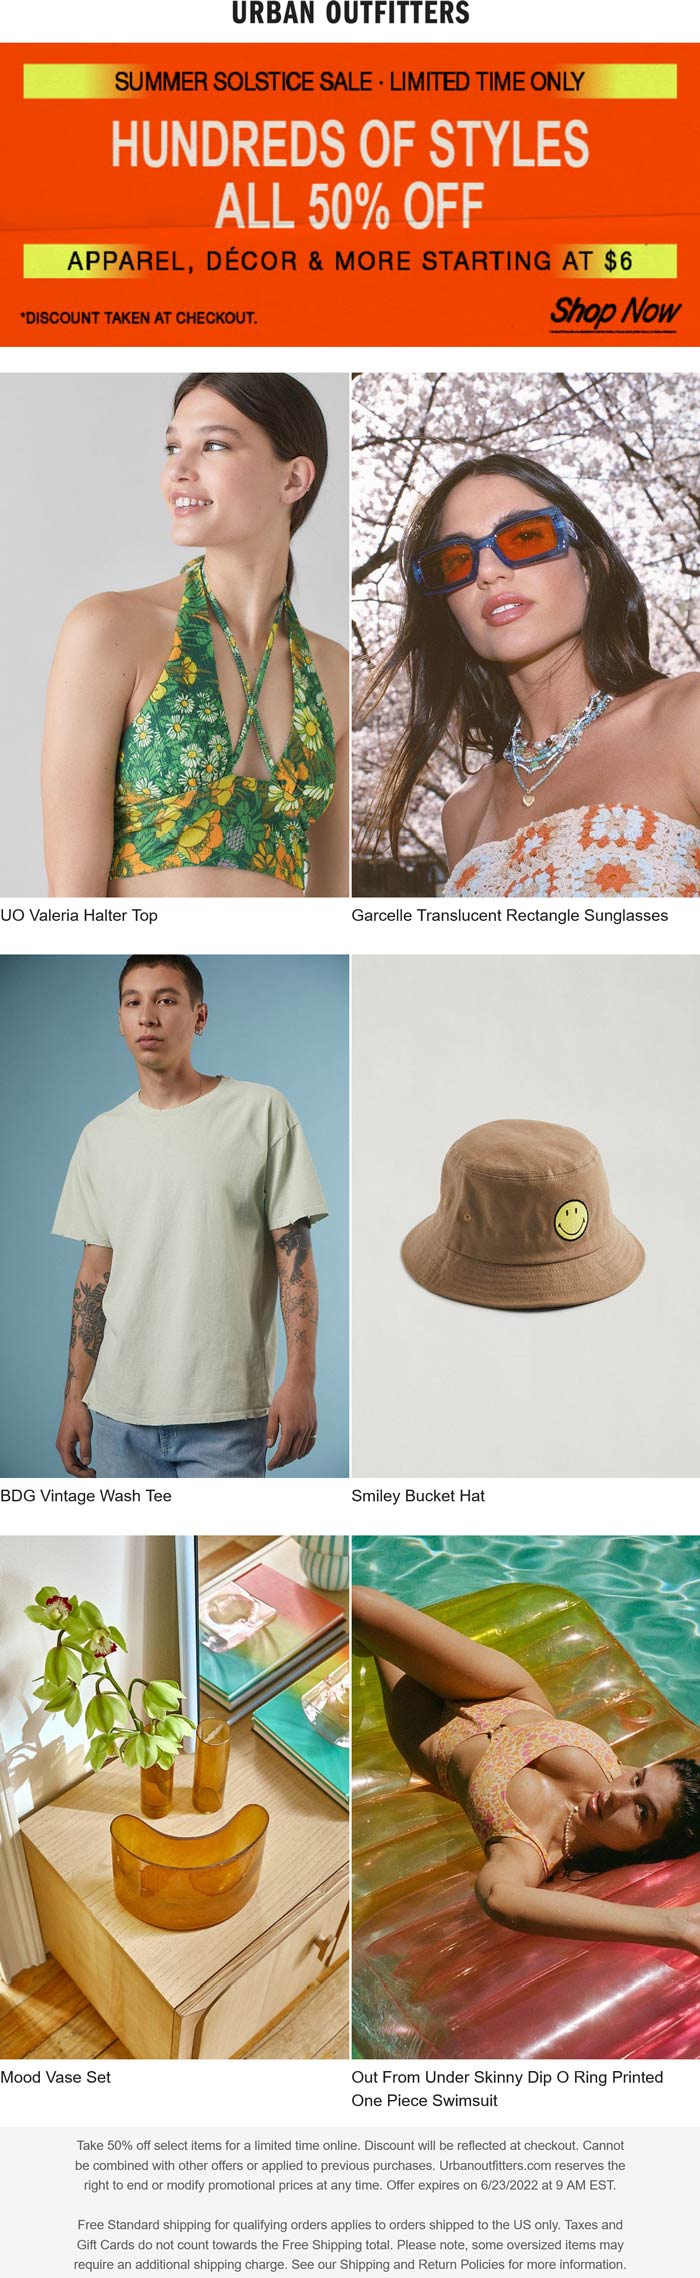 Urban Outfitters stores Coupon  50% off going on at Urban Outfitters #urbanoutfitters 